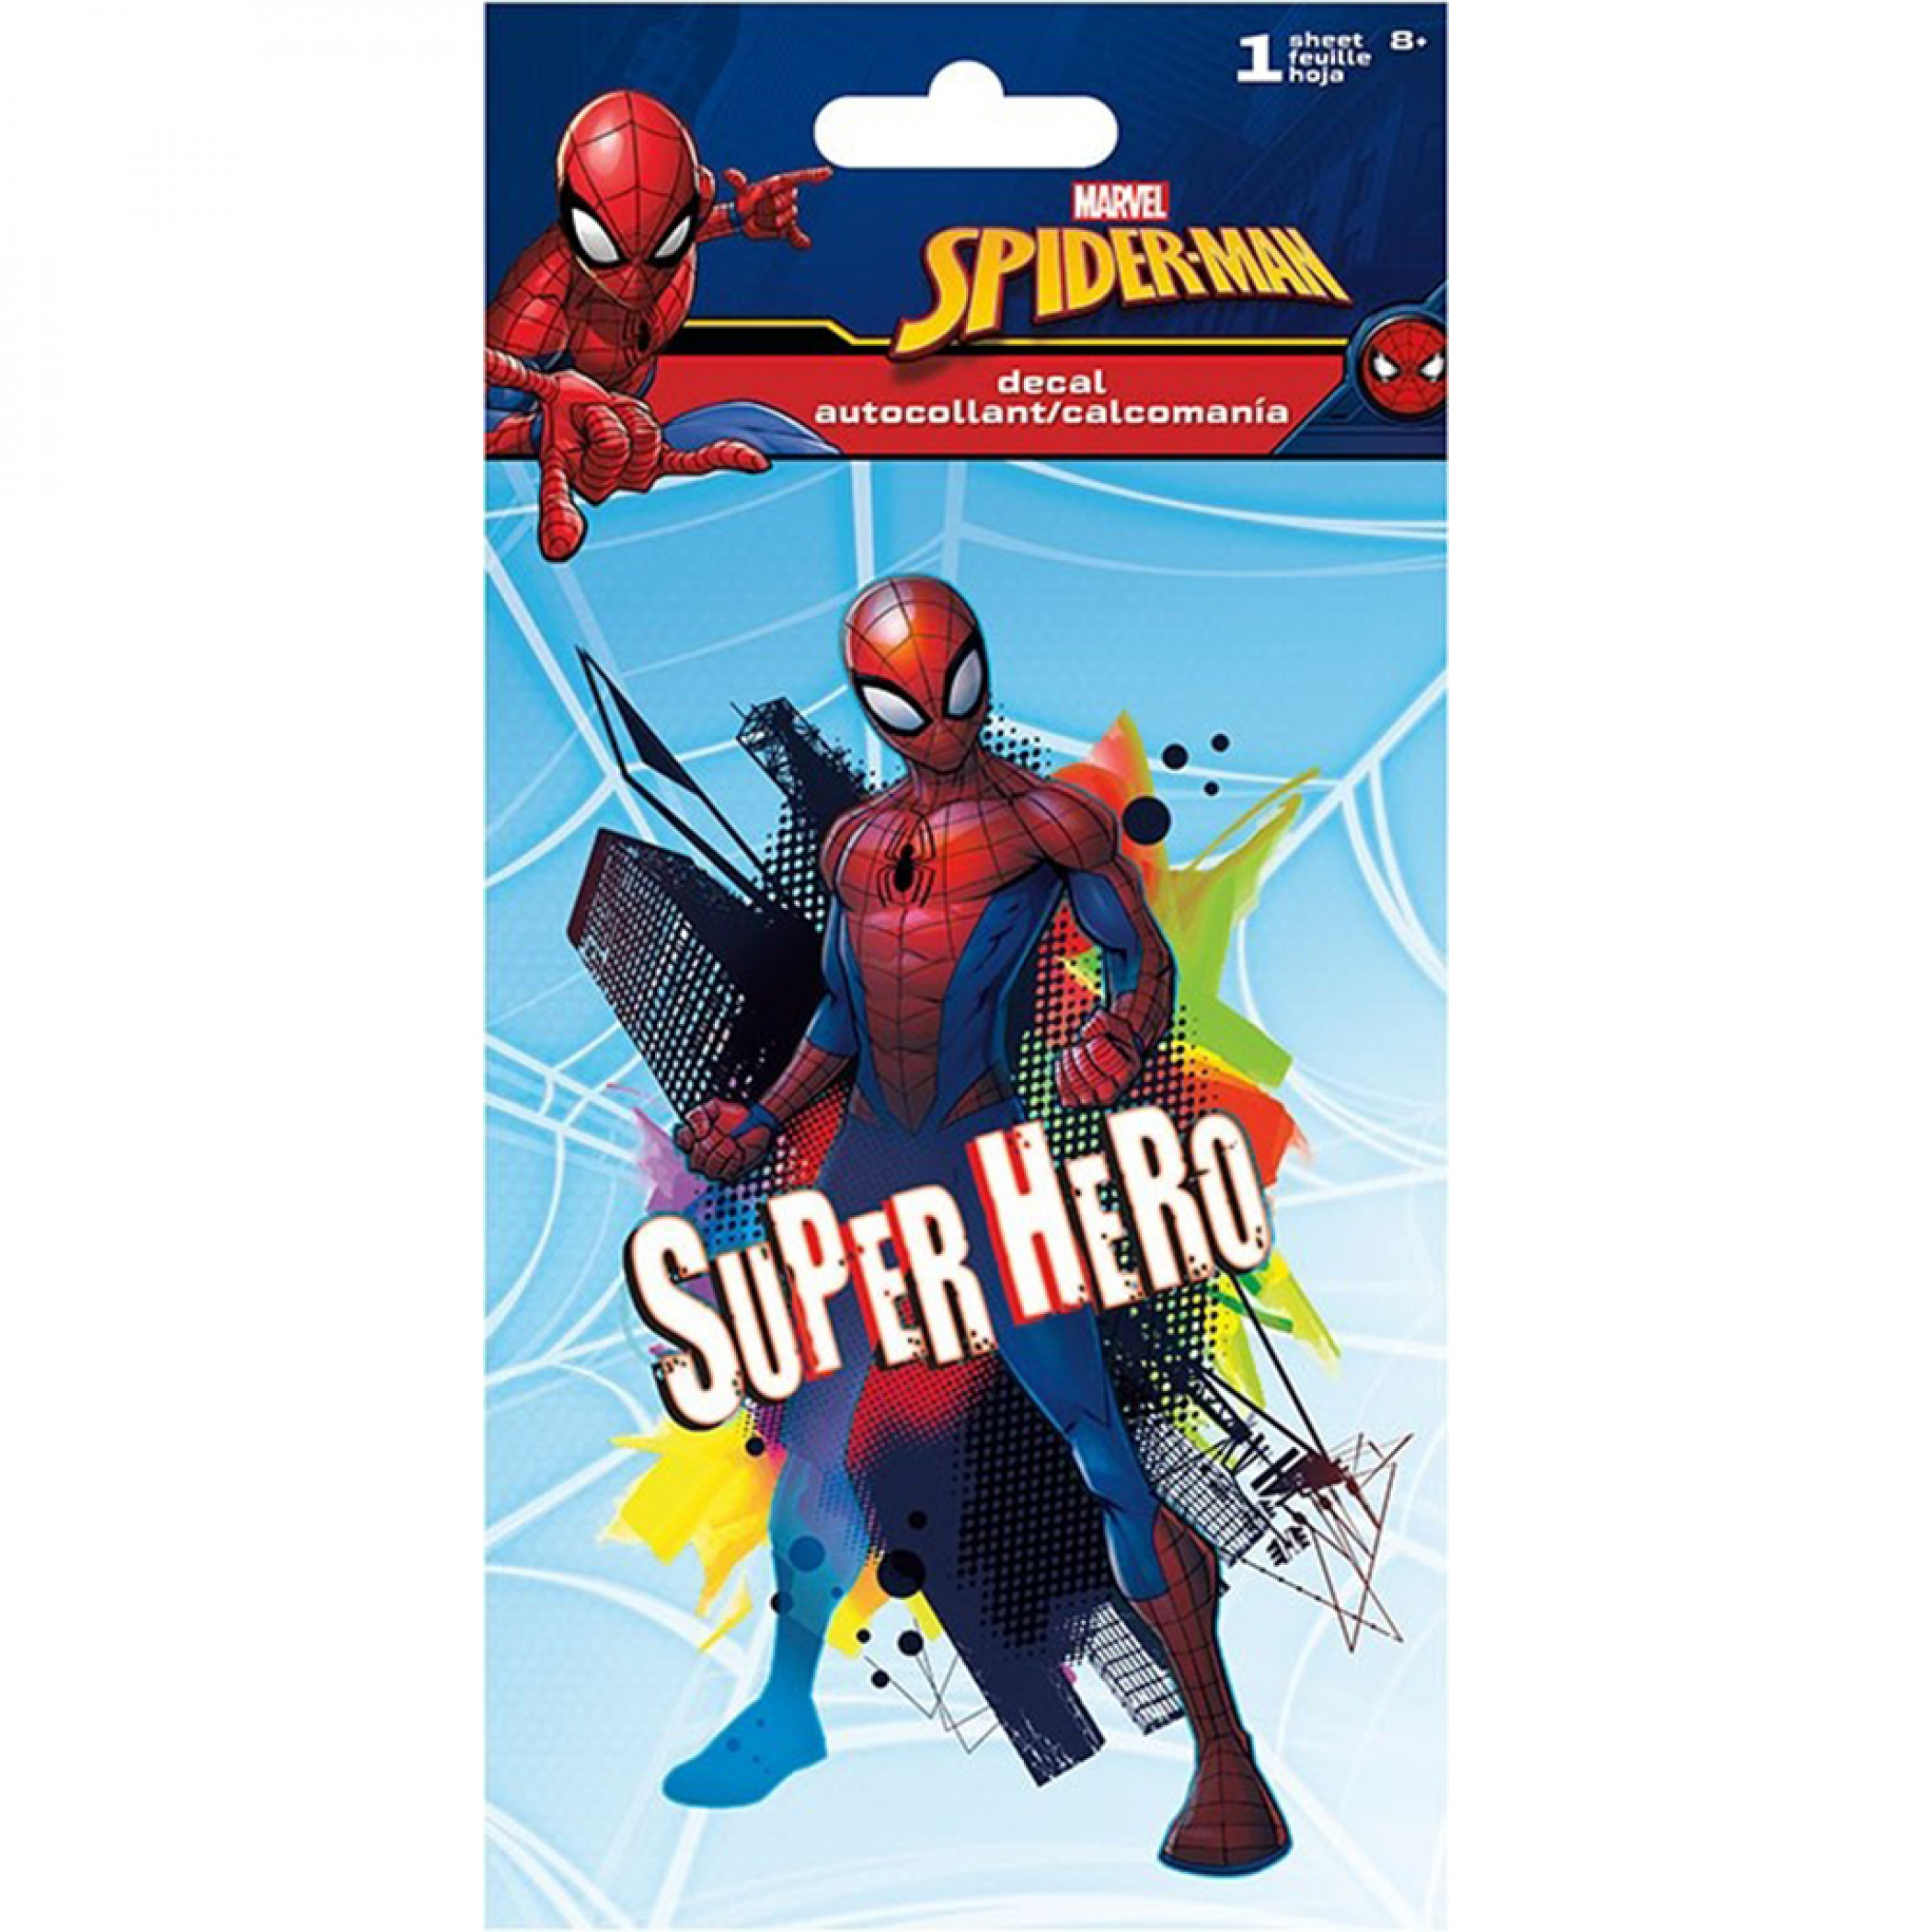 Spider-Man Classic Character Superhero 4-Color Decal Sticker